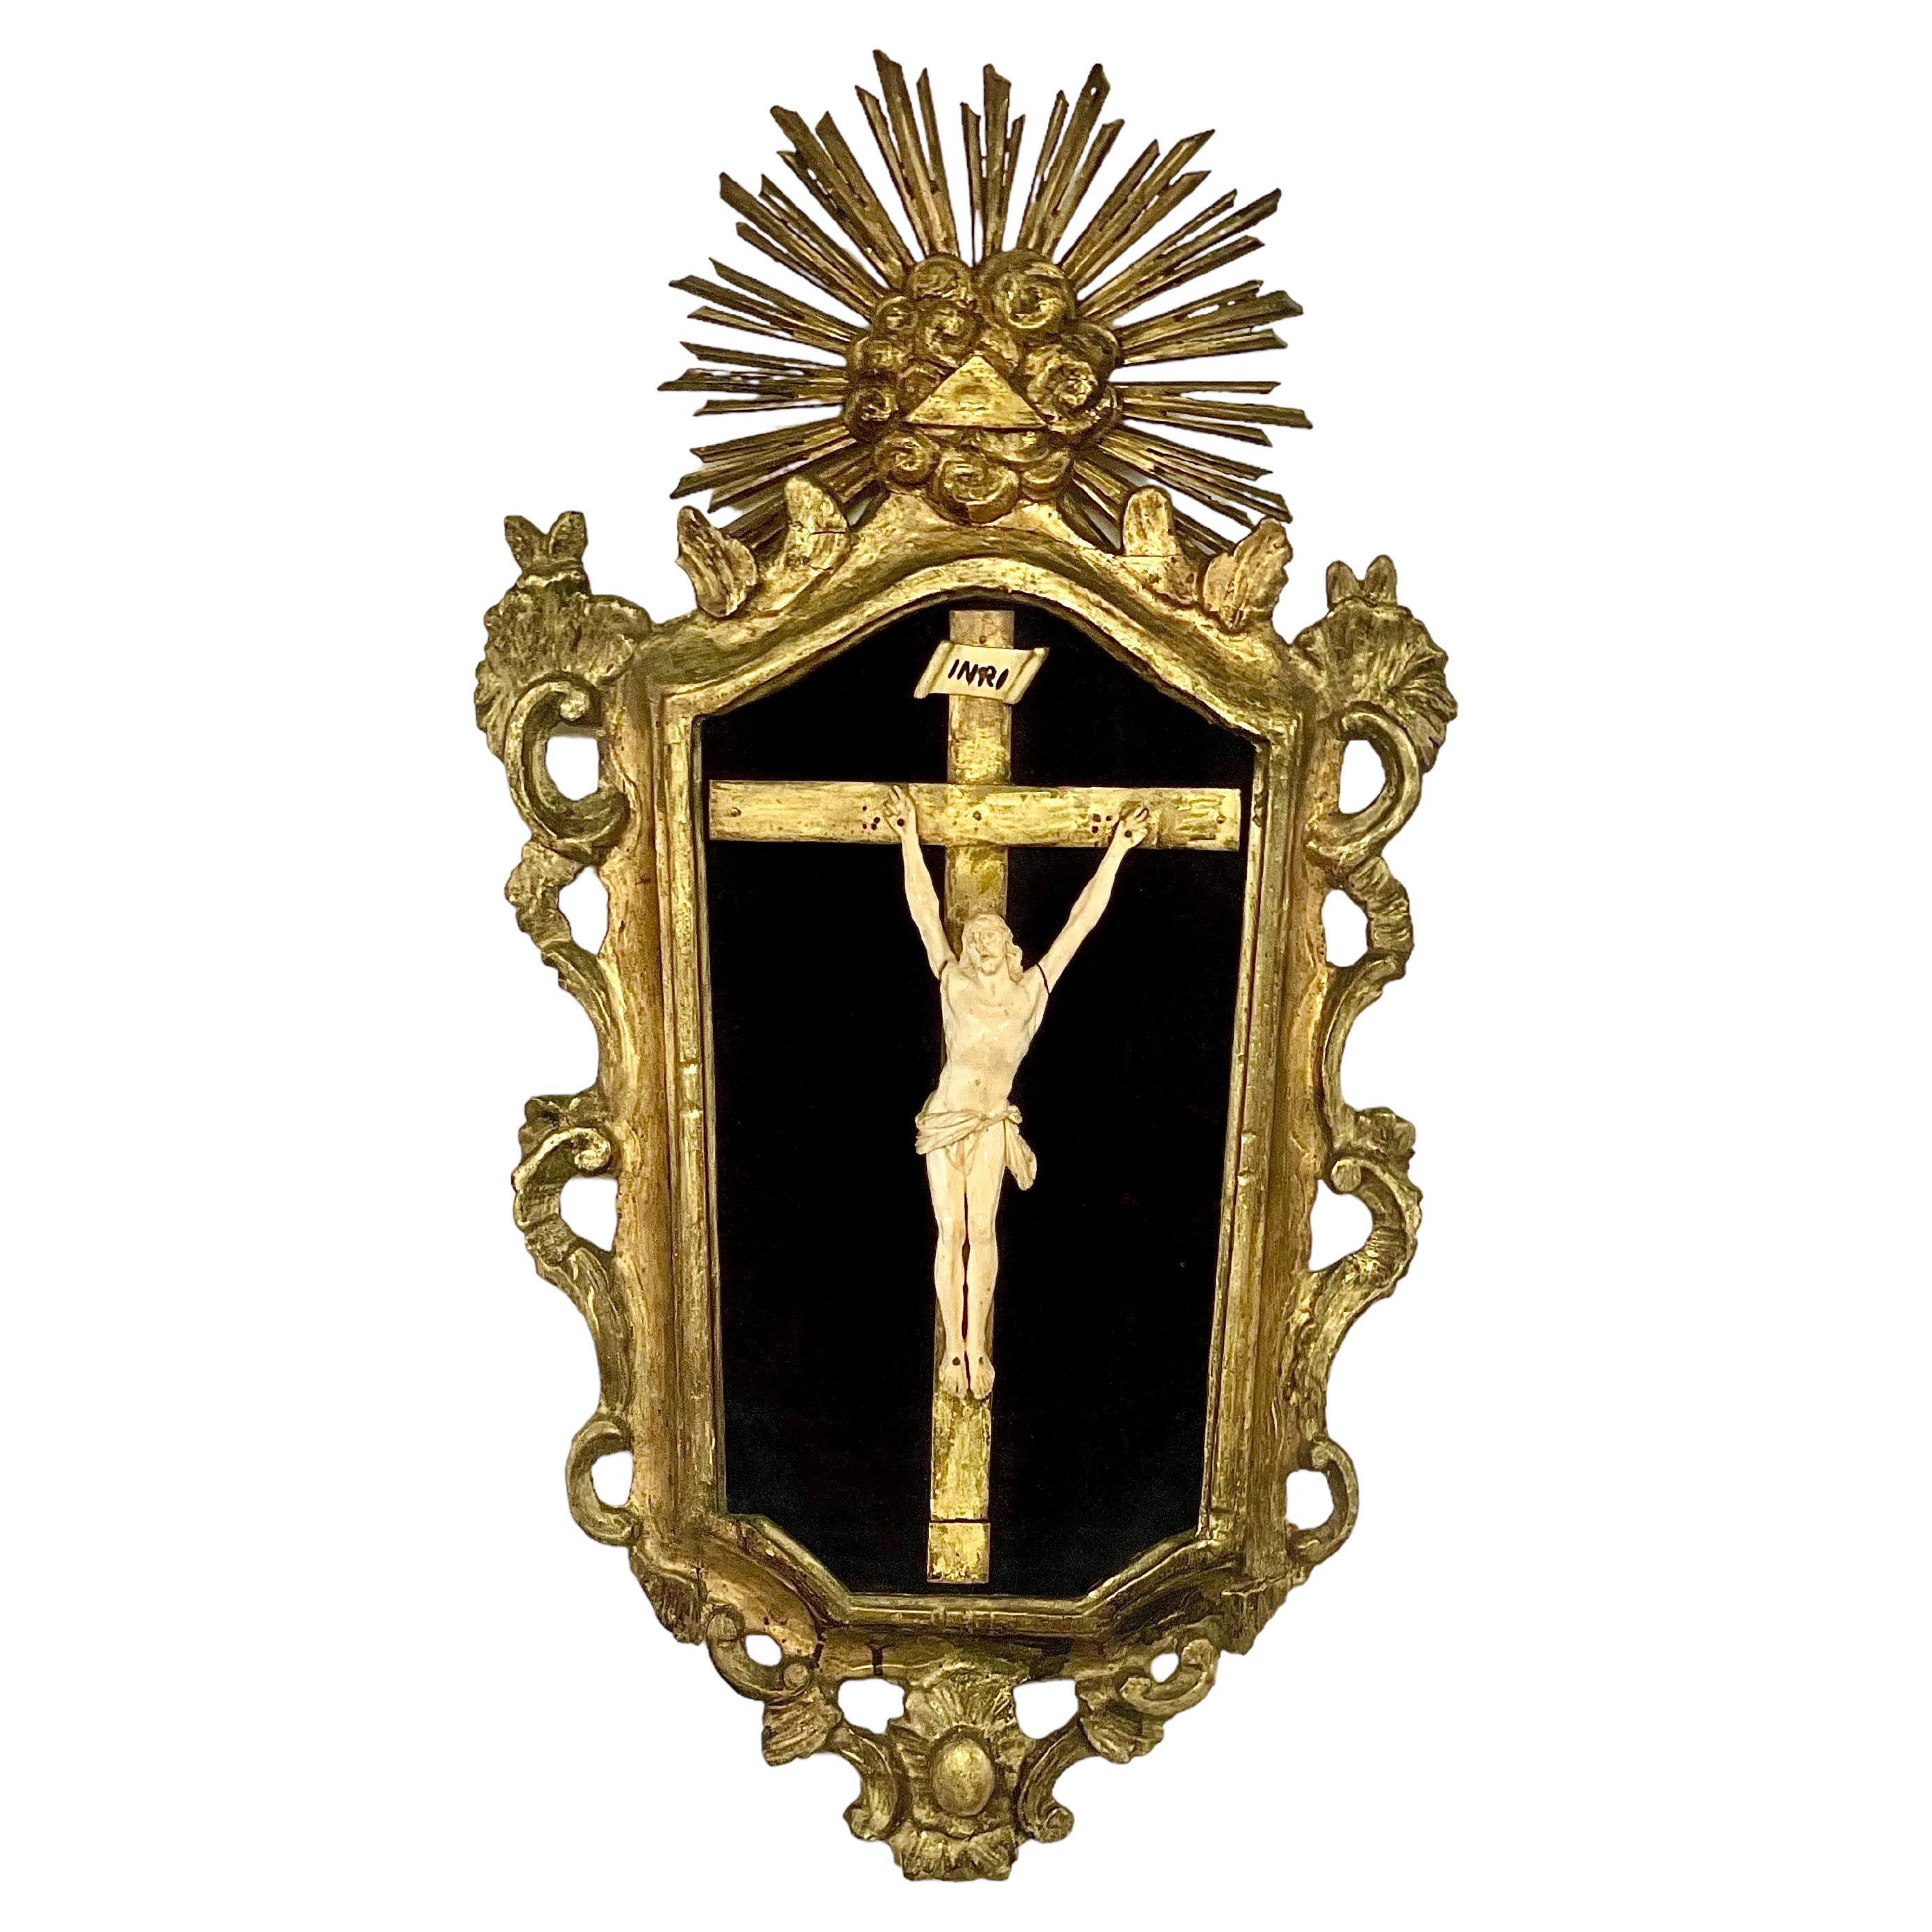 Regence Period French Crucifix in a Giltwood Frame 18th Century